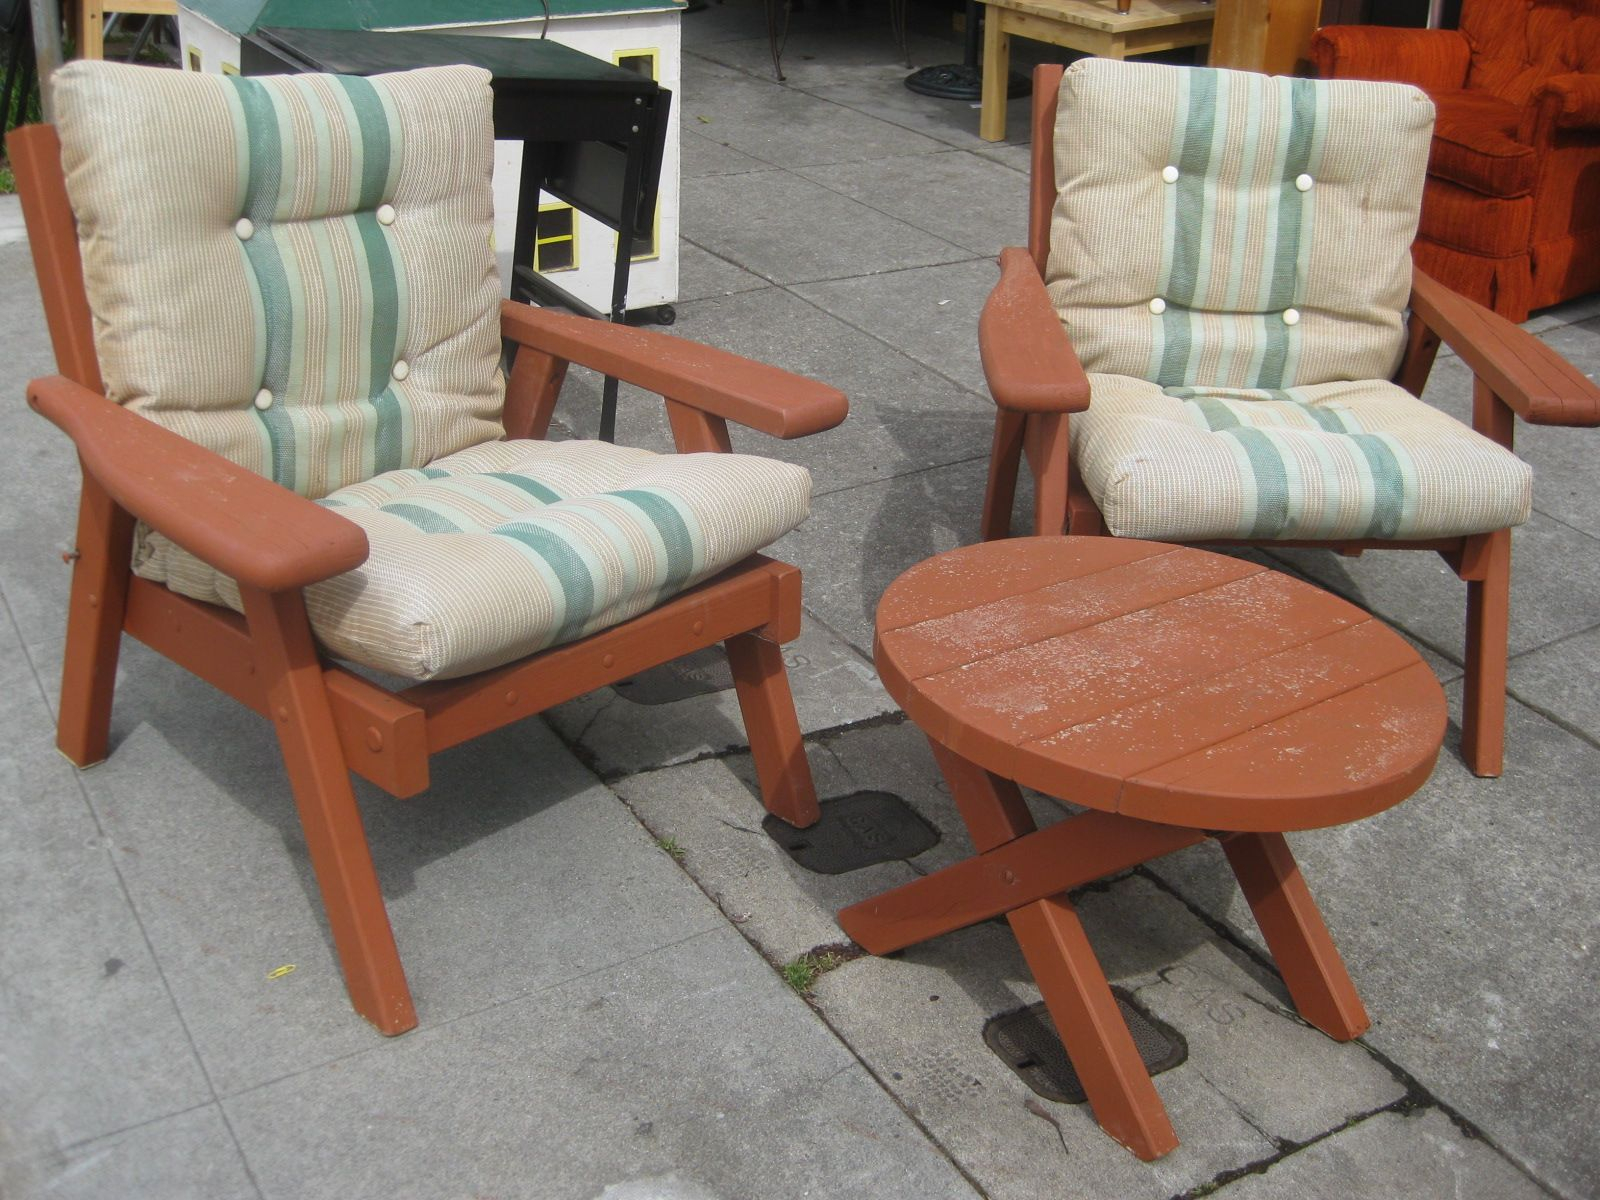 Redwood Patio Furniture Like Moms Patio Chairs Before I throughout sizing 1600 X 1200